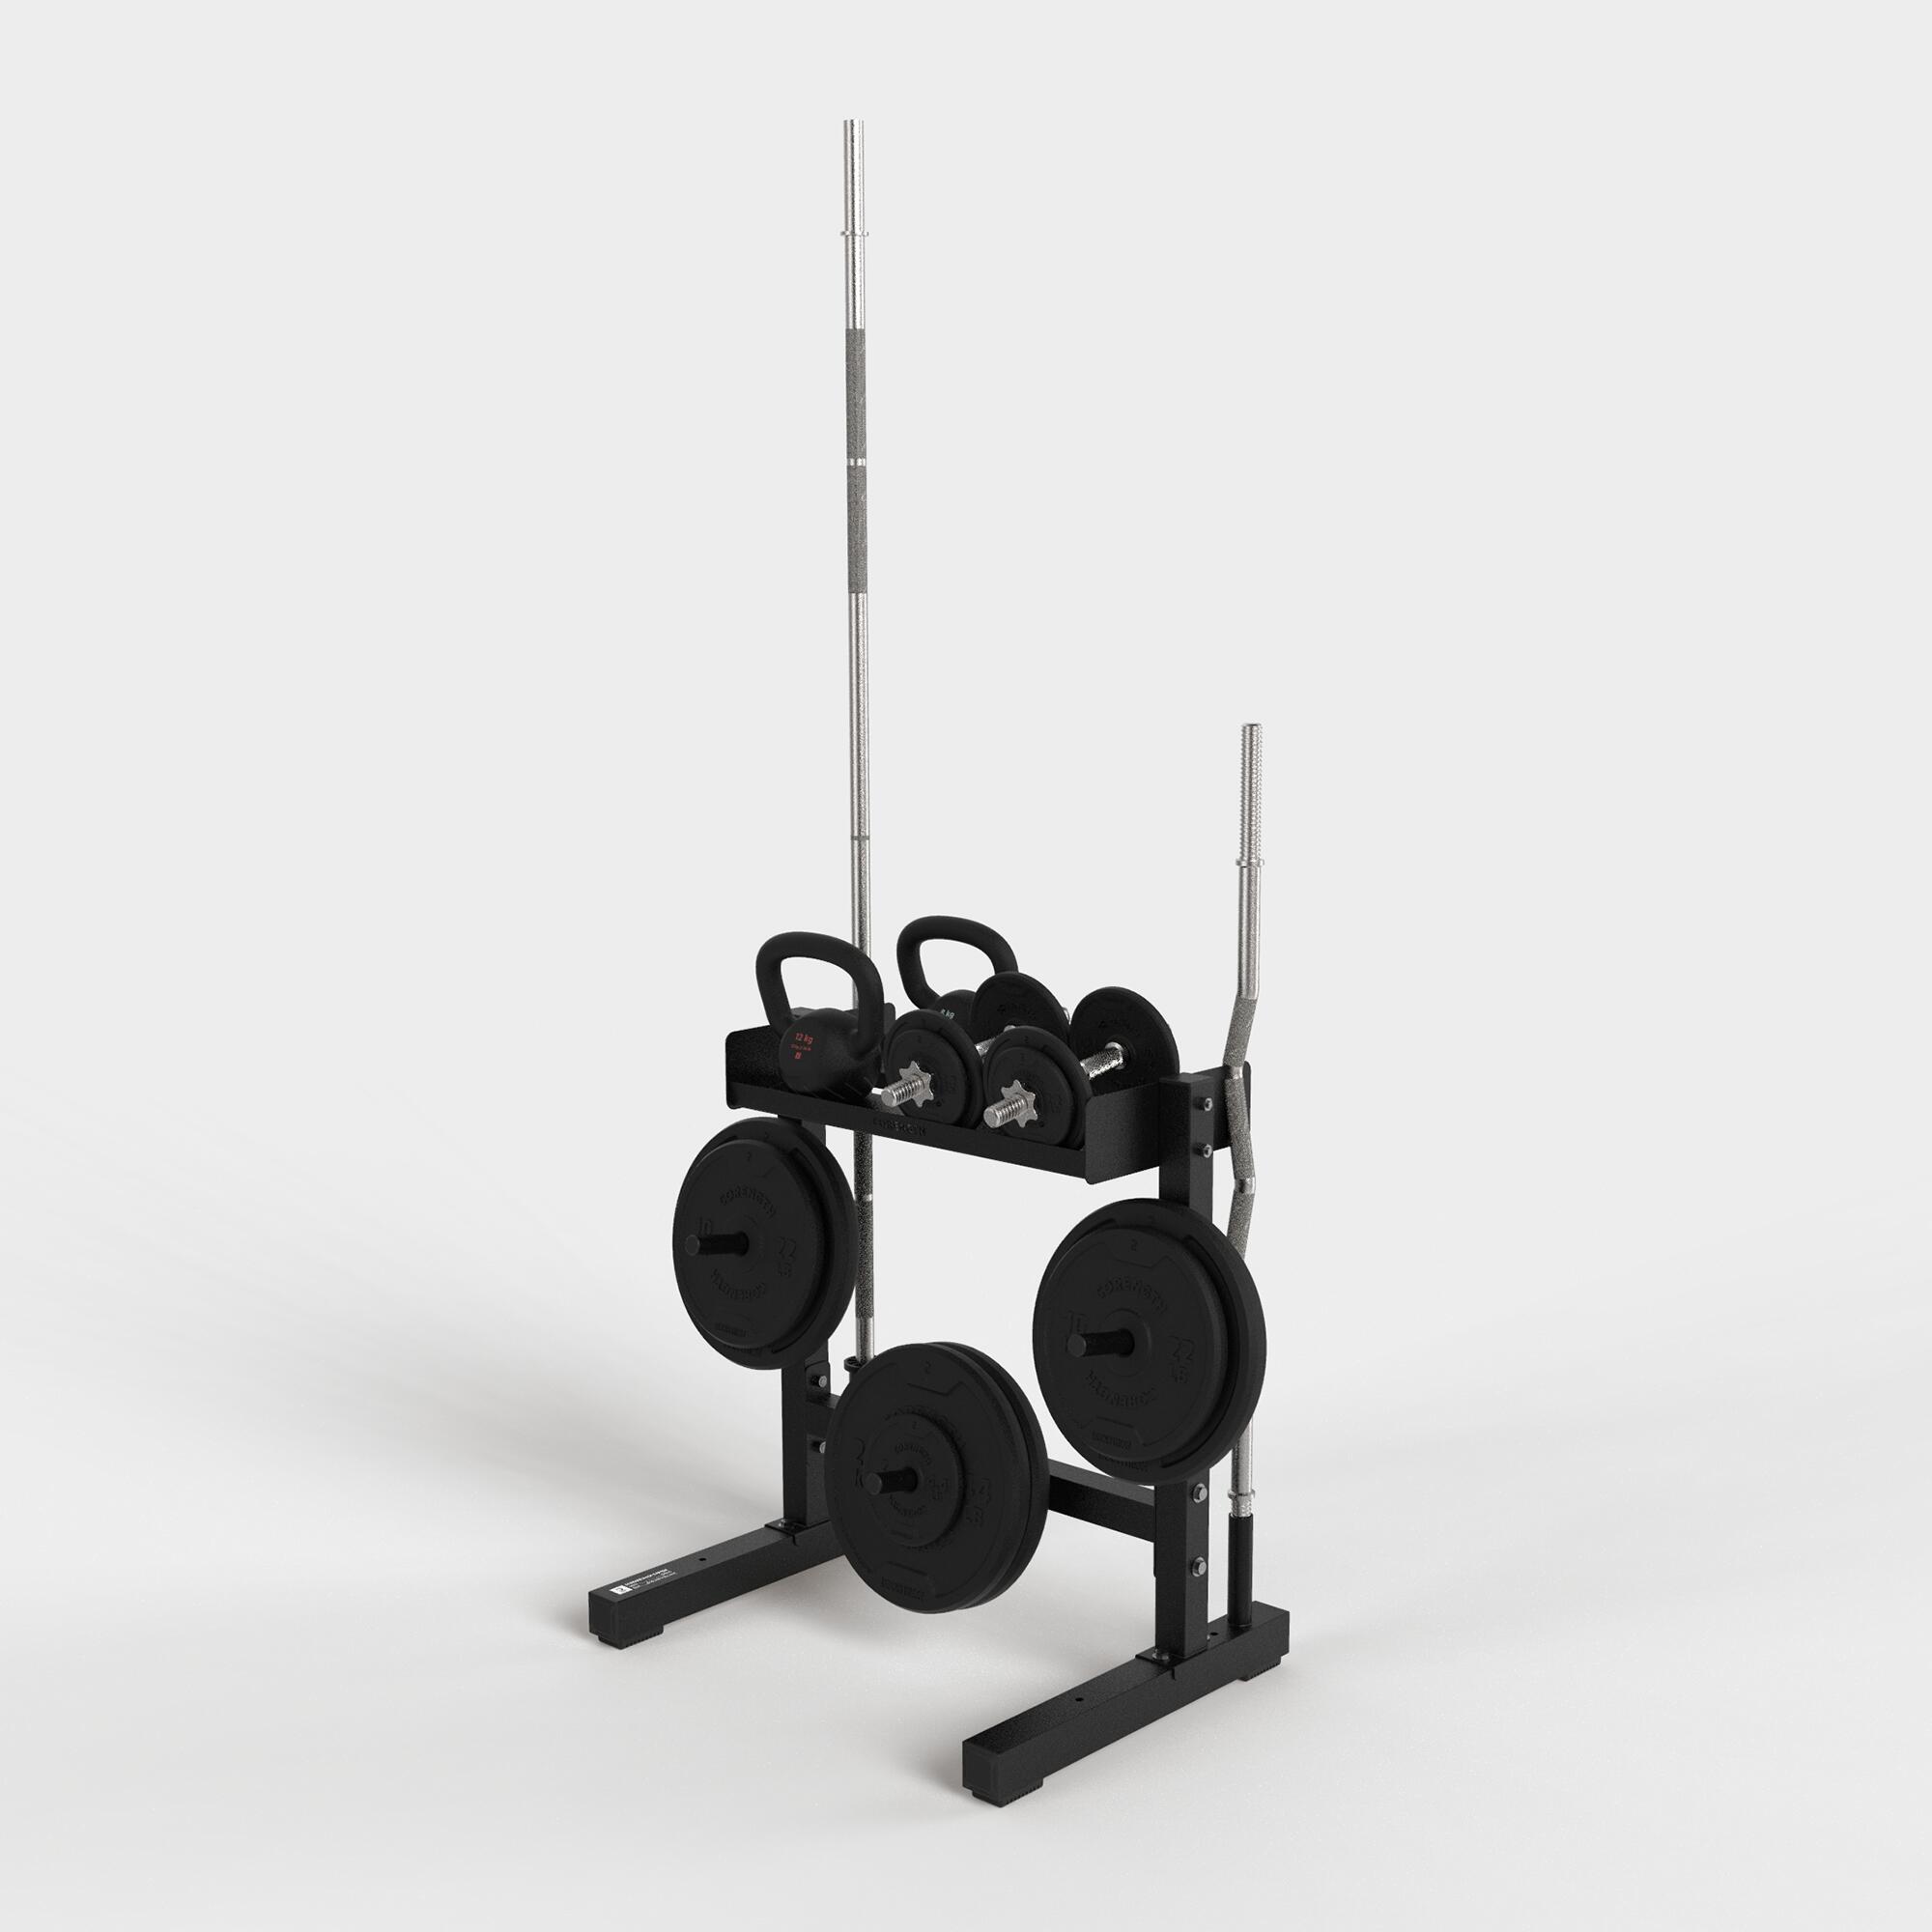 Weight Training Storage Rack for Bars and Weights 6/10